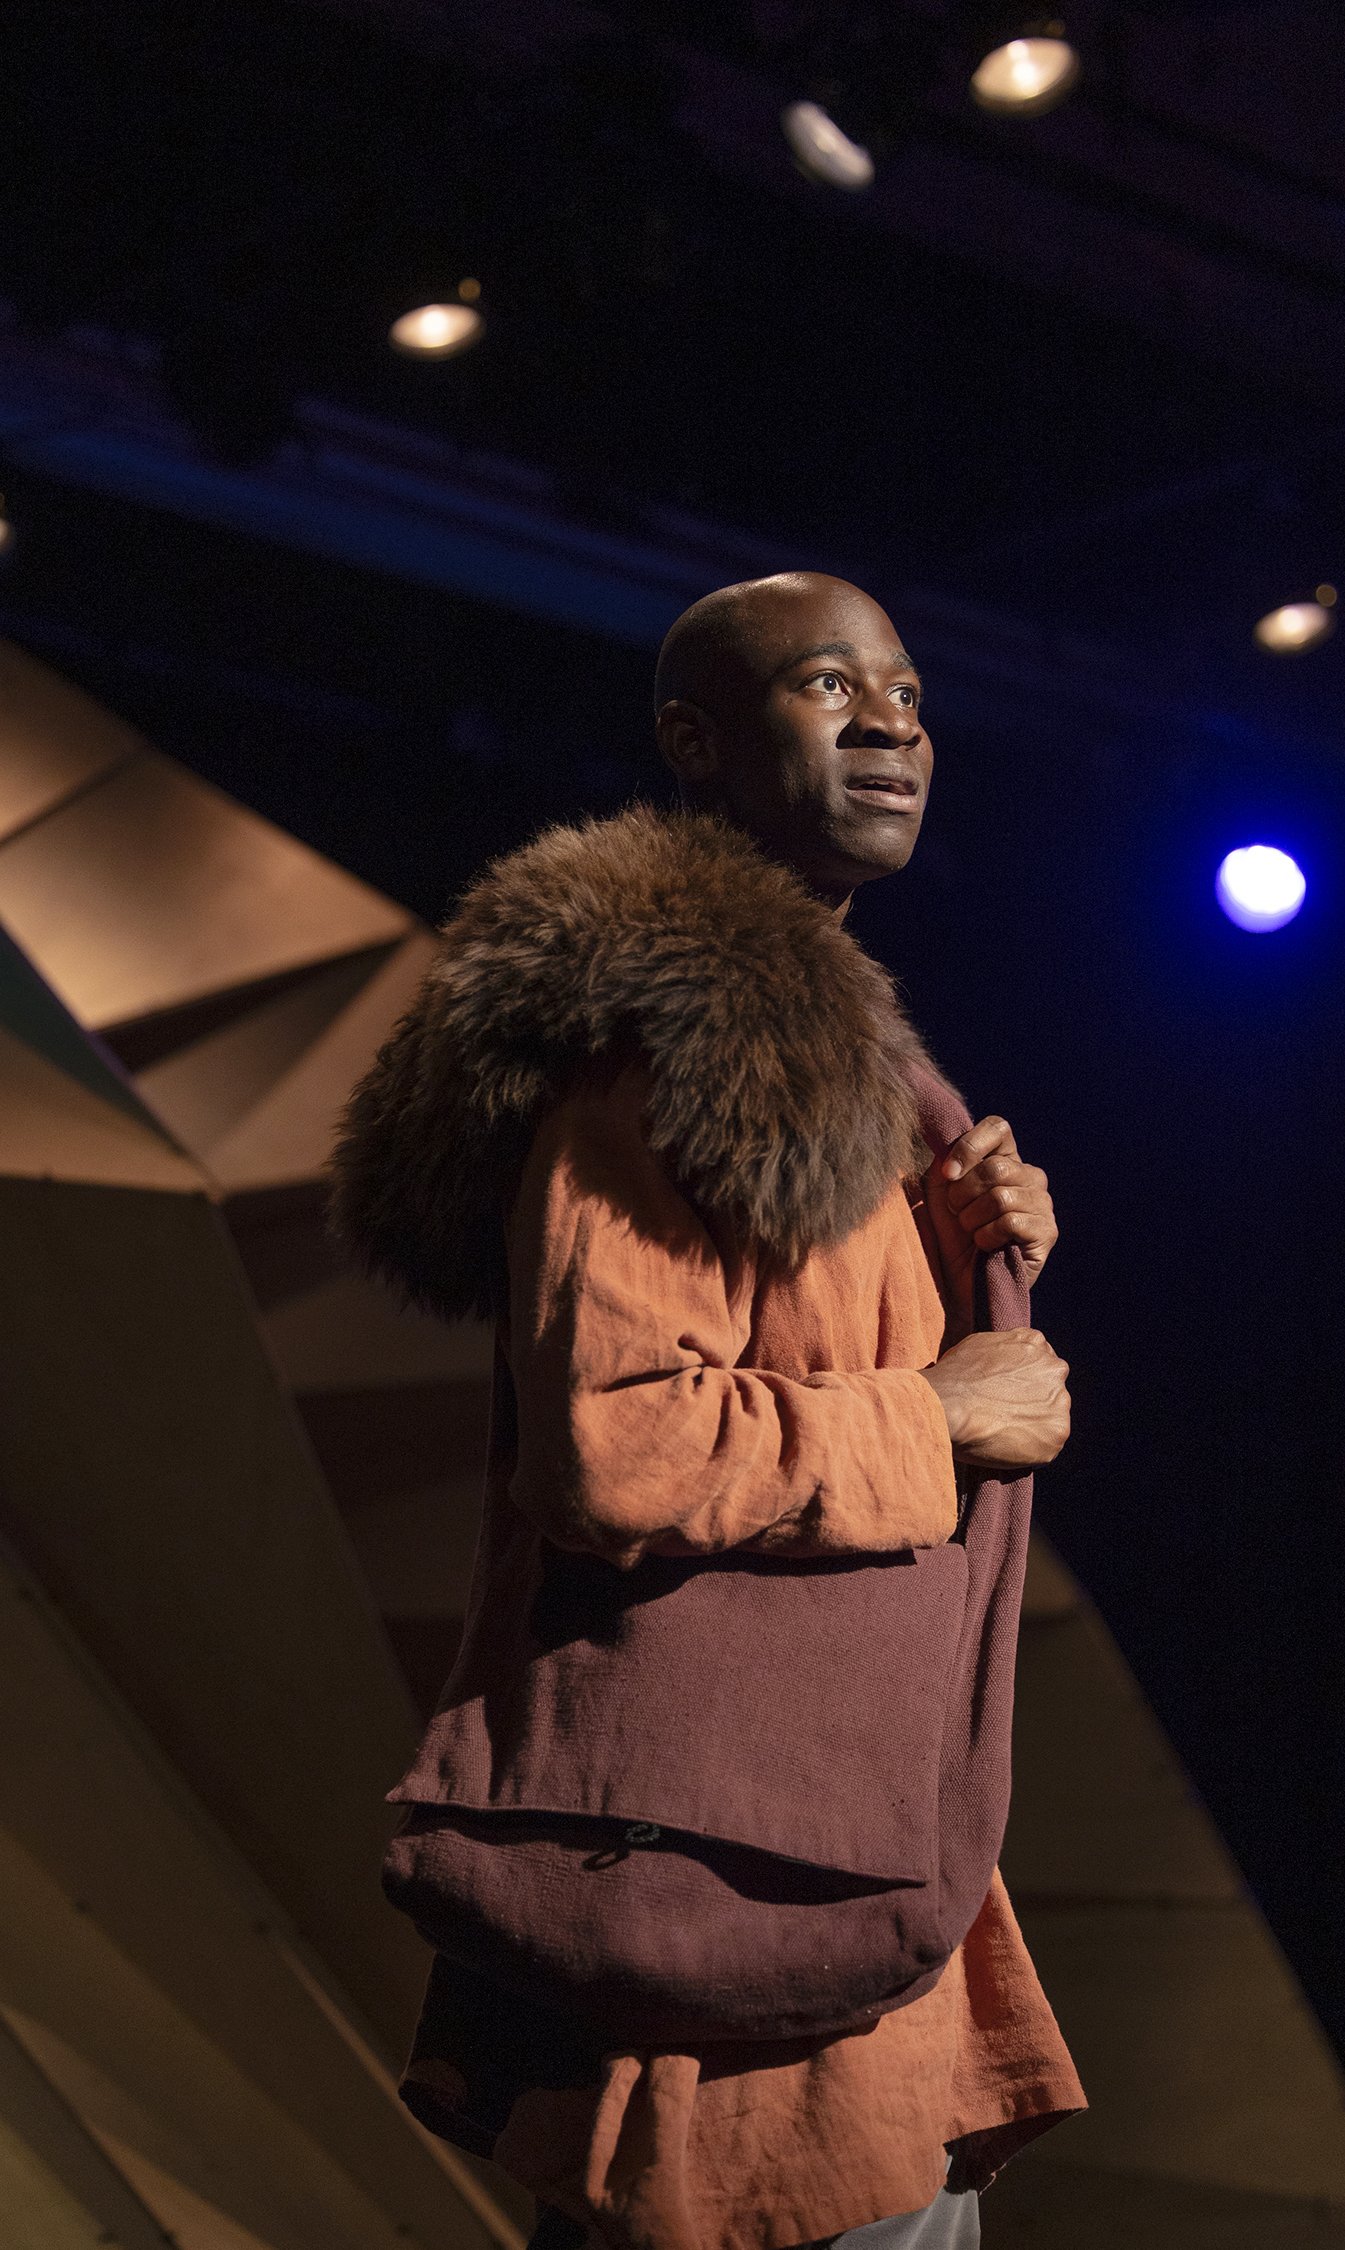 Kevin Aoussou as Genly Ai. Photo courtesy of Tim Fuller.